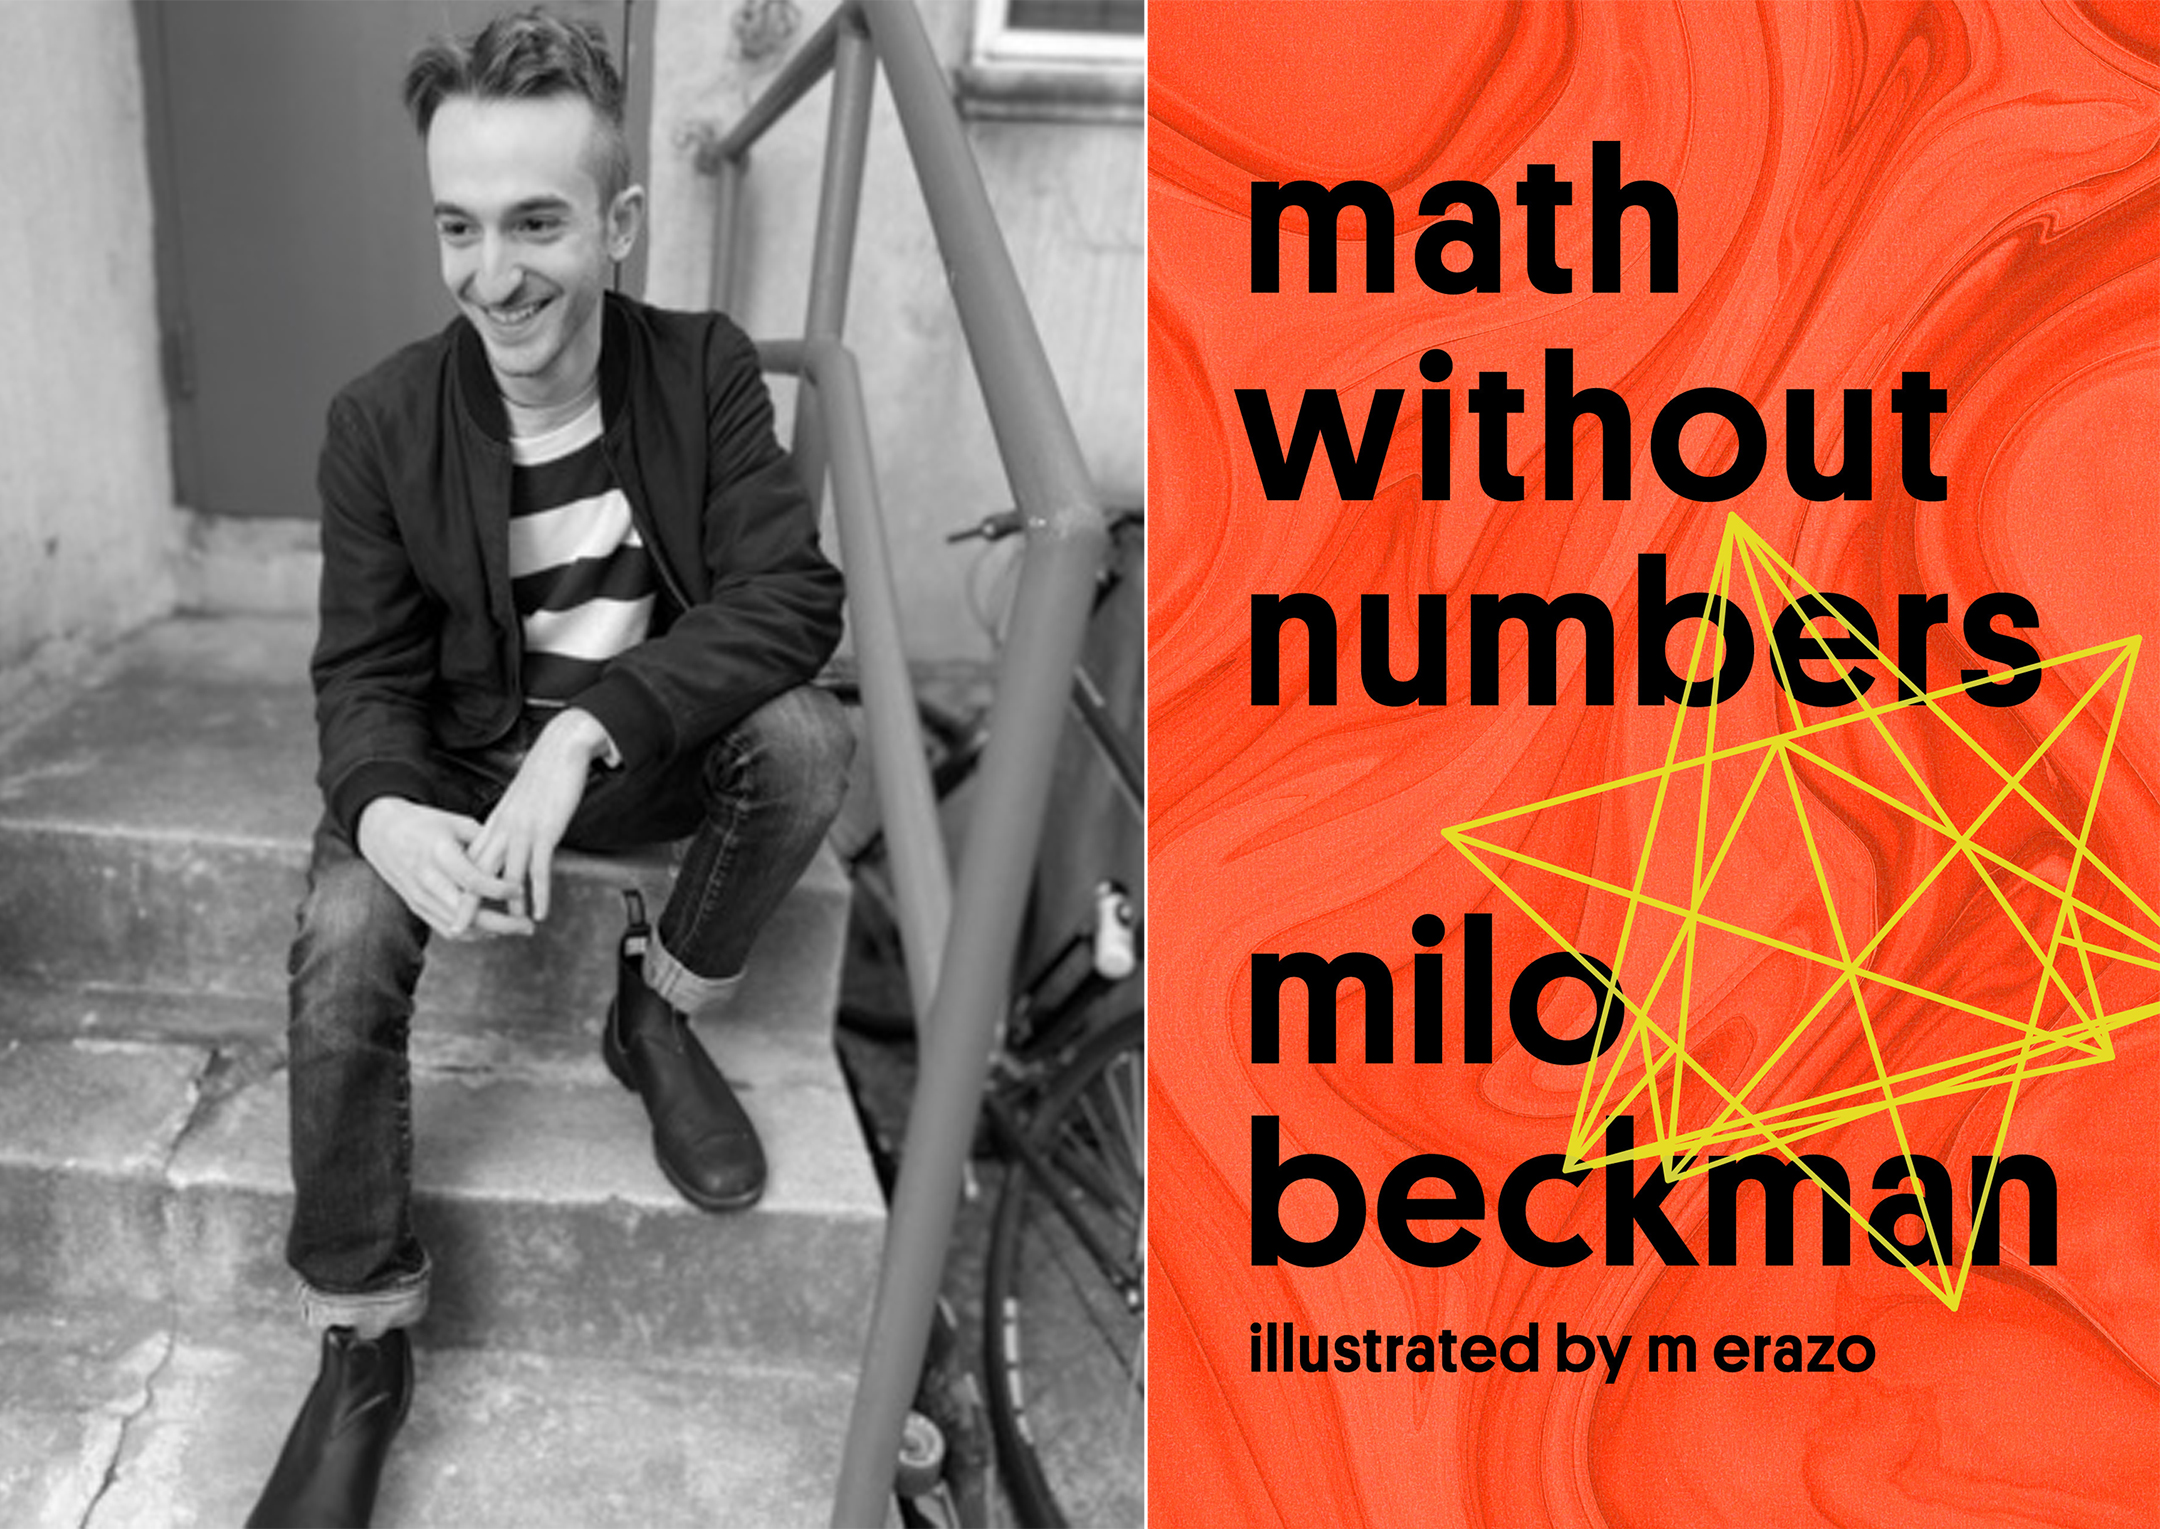 Photo of author Milo Beckman on the left, and the cover of the book Math Without Numbers on the right